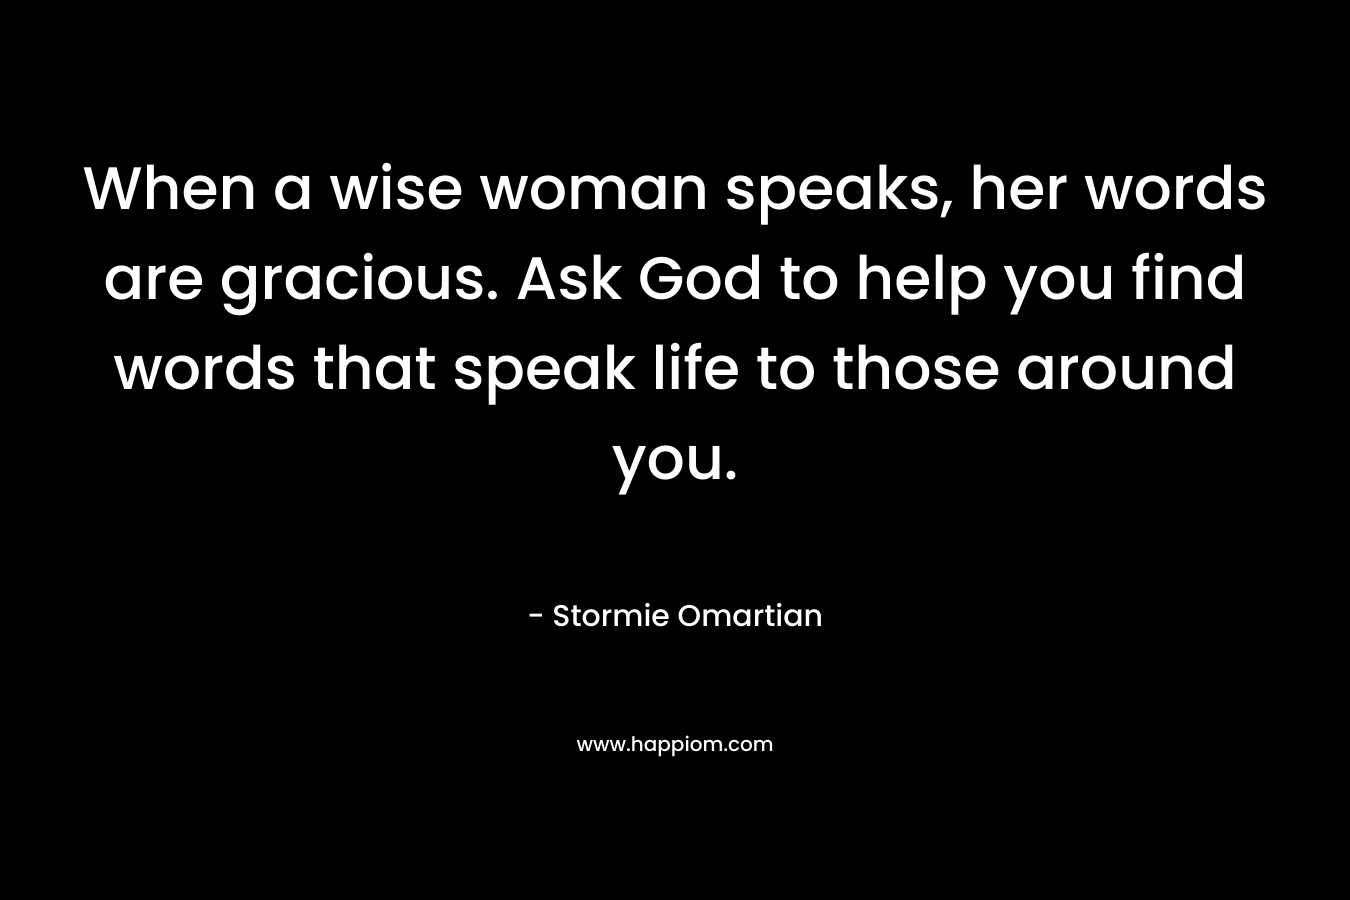 When a wise woman speaks, her words are gracious. Ask God to help you find words that speak life to those around you. – Stormie Omartian